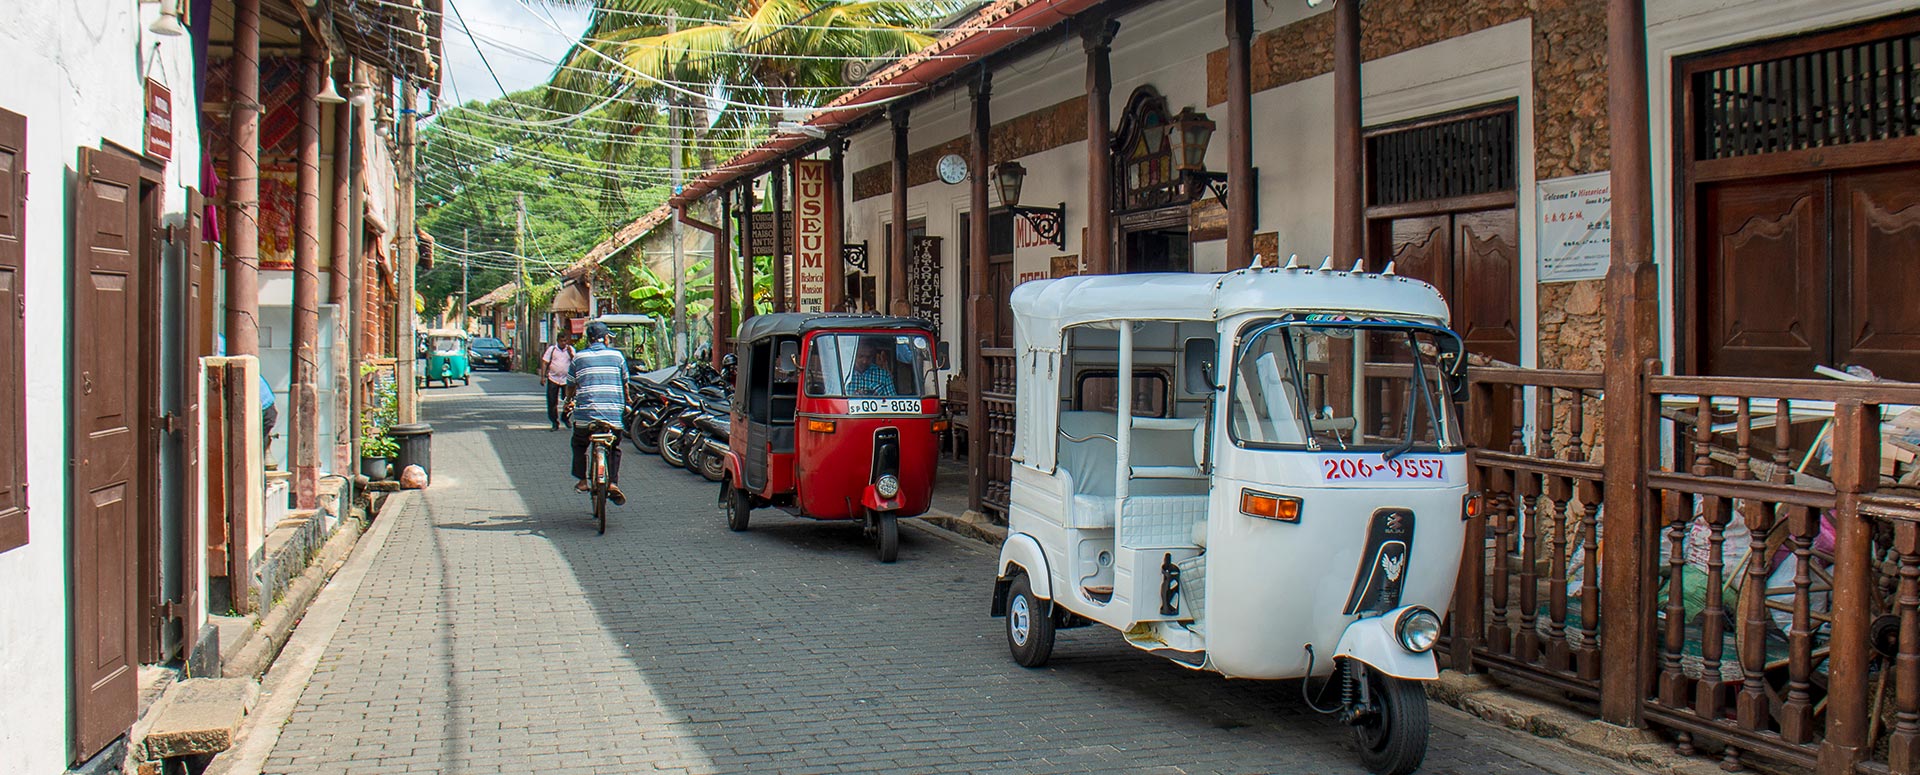 Colonial styled buildings on both sides of a cobblestone pathway at Galle fort